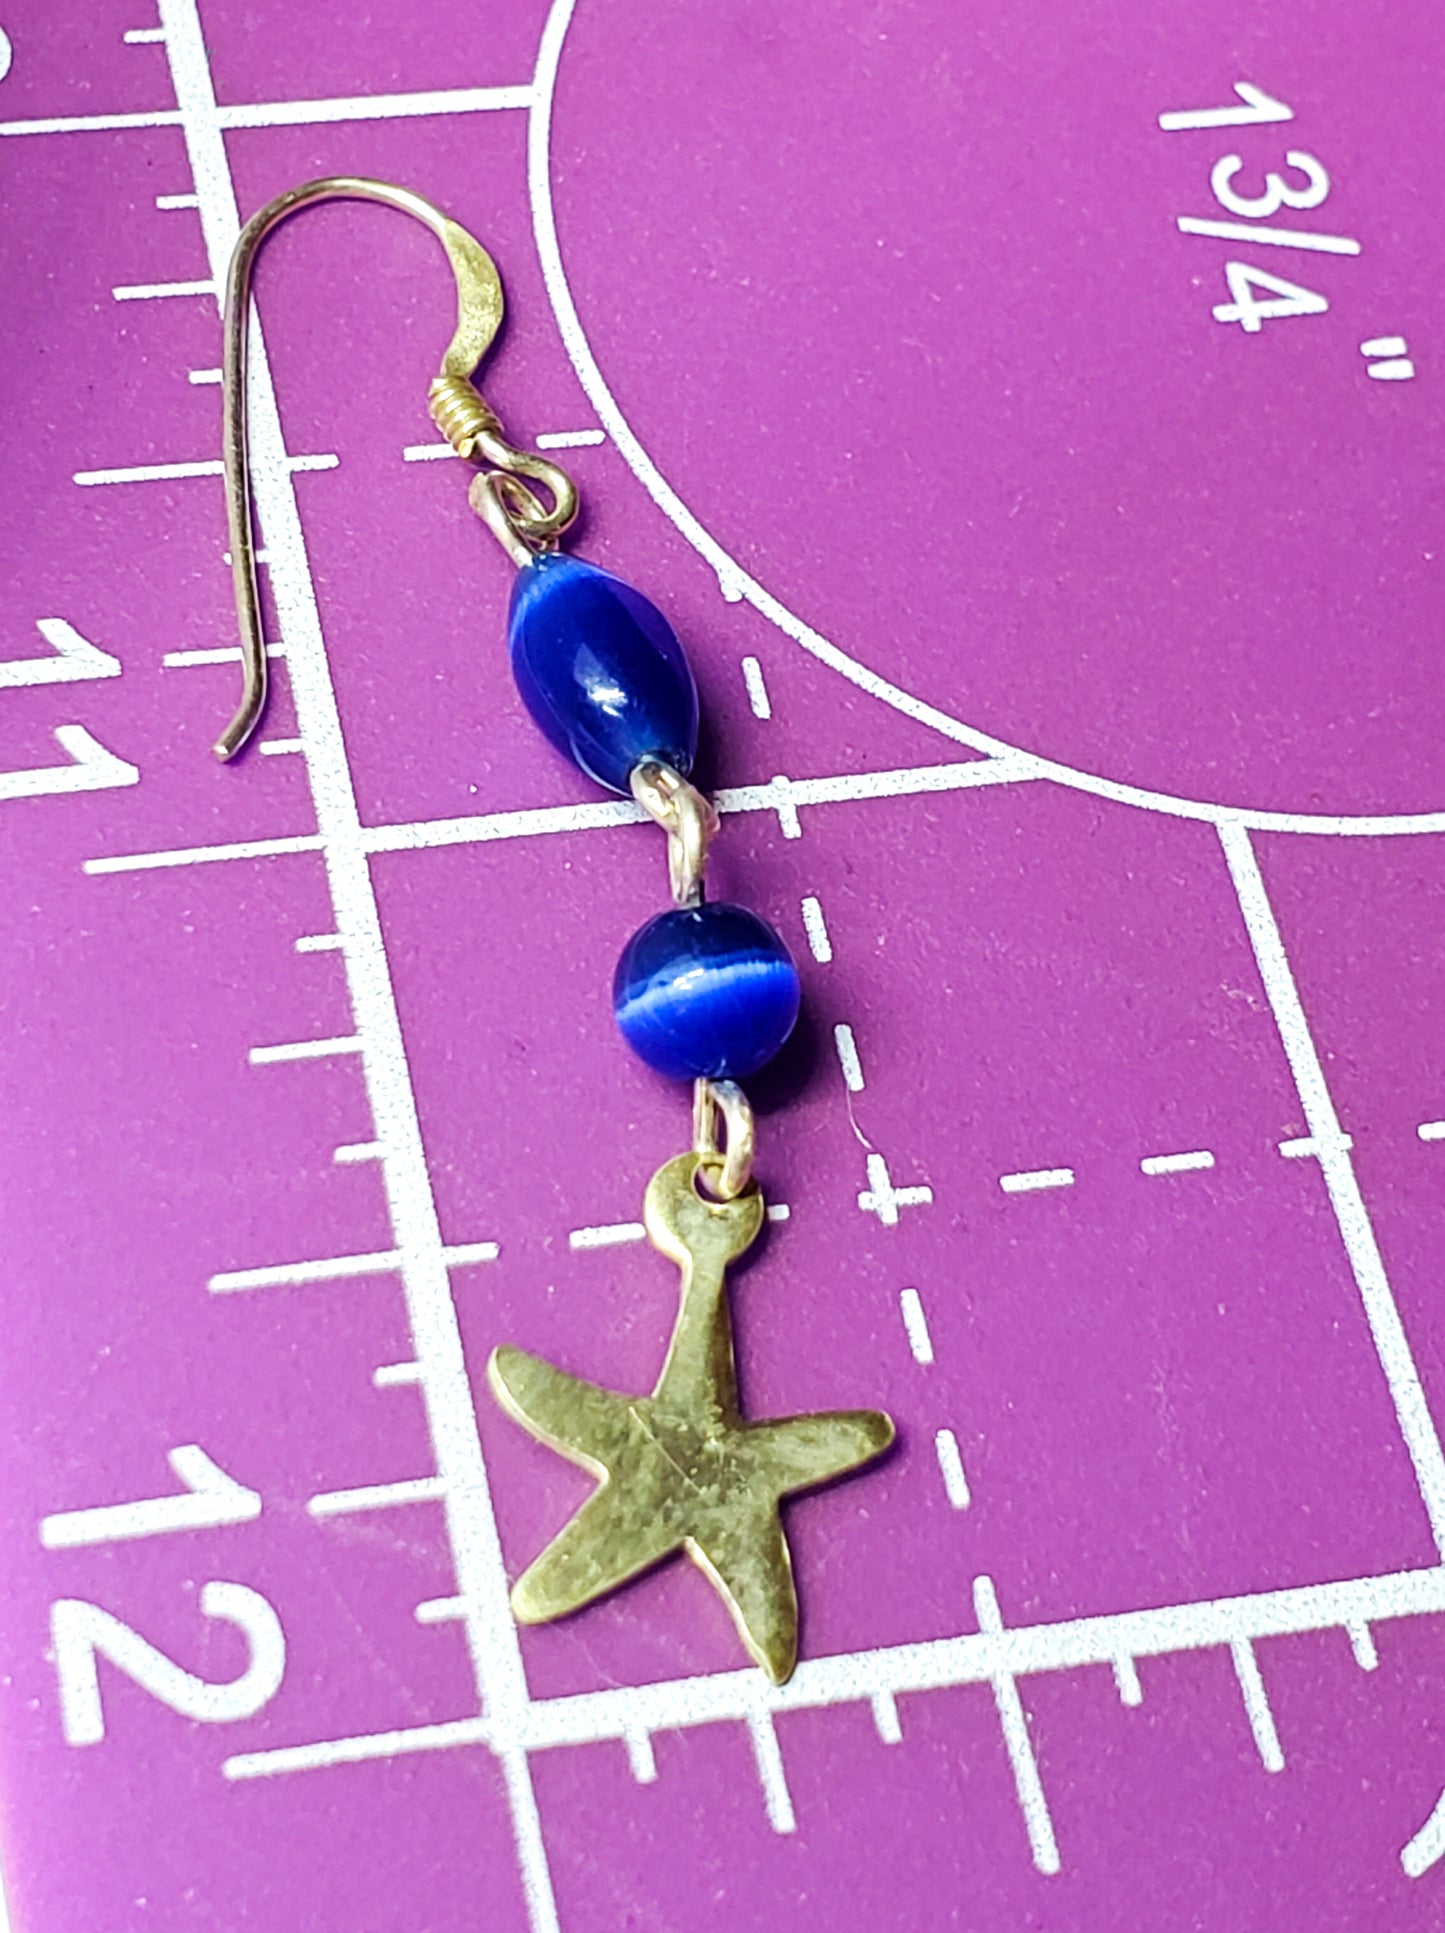 Blue cat's eye glass sterling silver star drop vintage earrings 2 inches 925